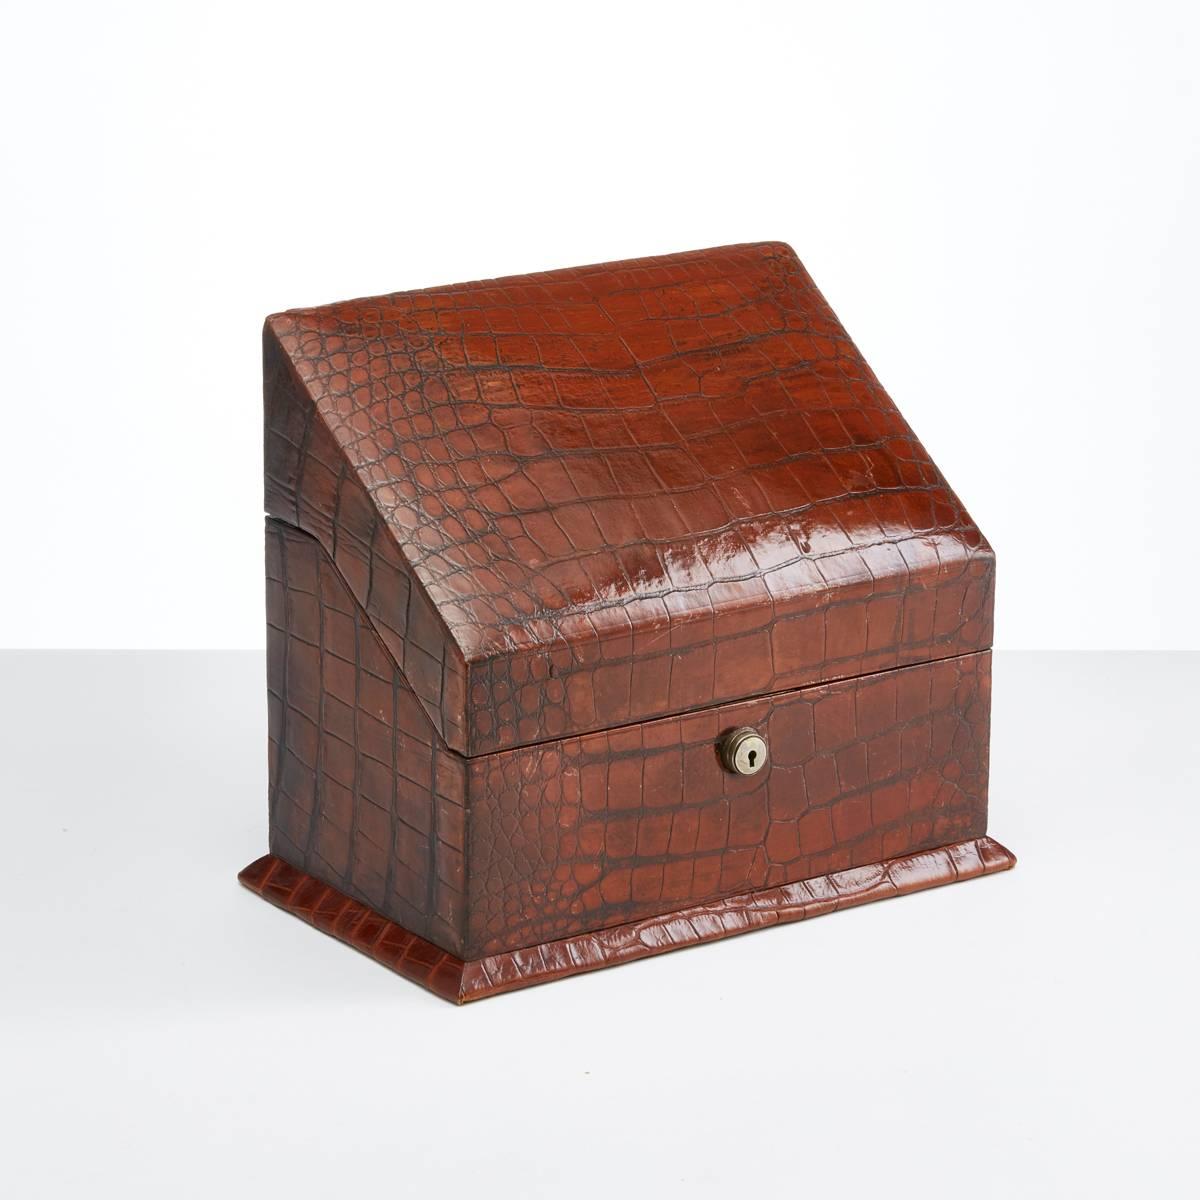 Crocodile letter box by Barrett & Sons 63-64 Piccadilly London, circa 1910

This piece is in very good condition with just a few small surface scratches 
around the lock.
The Morocco leather and silk lined interior are in excellent